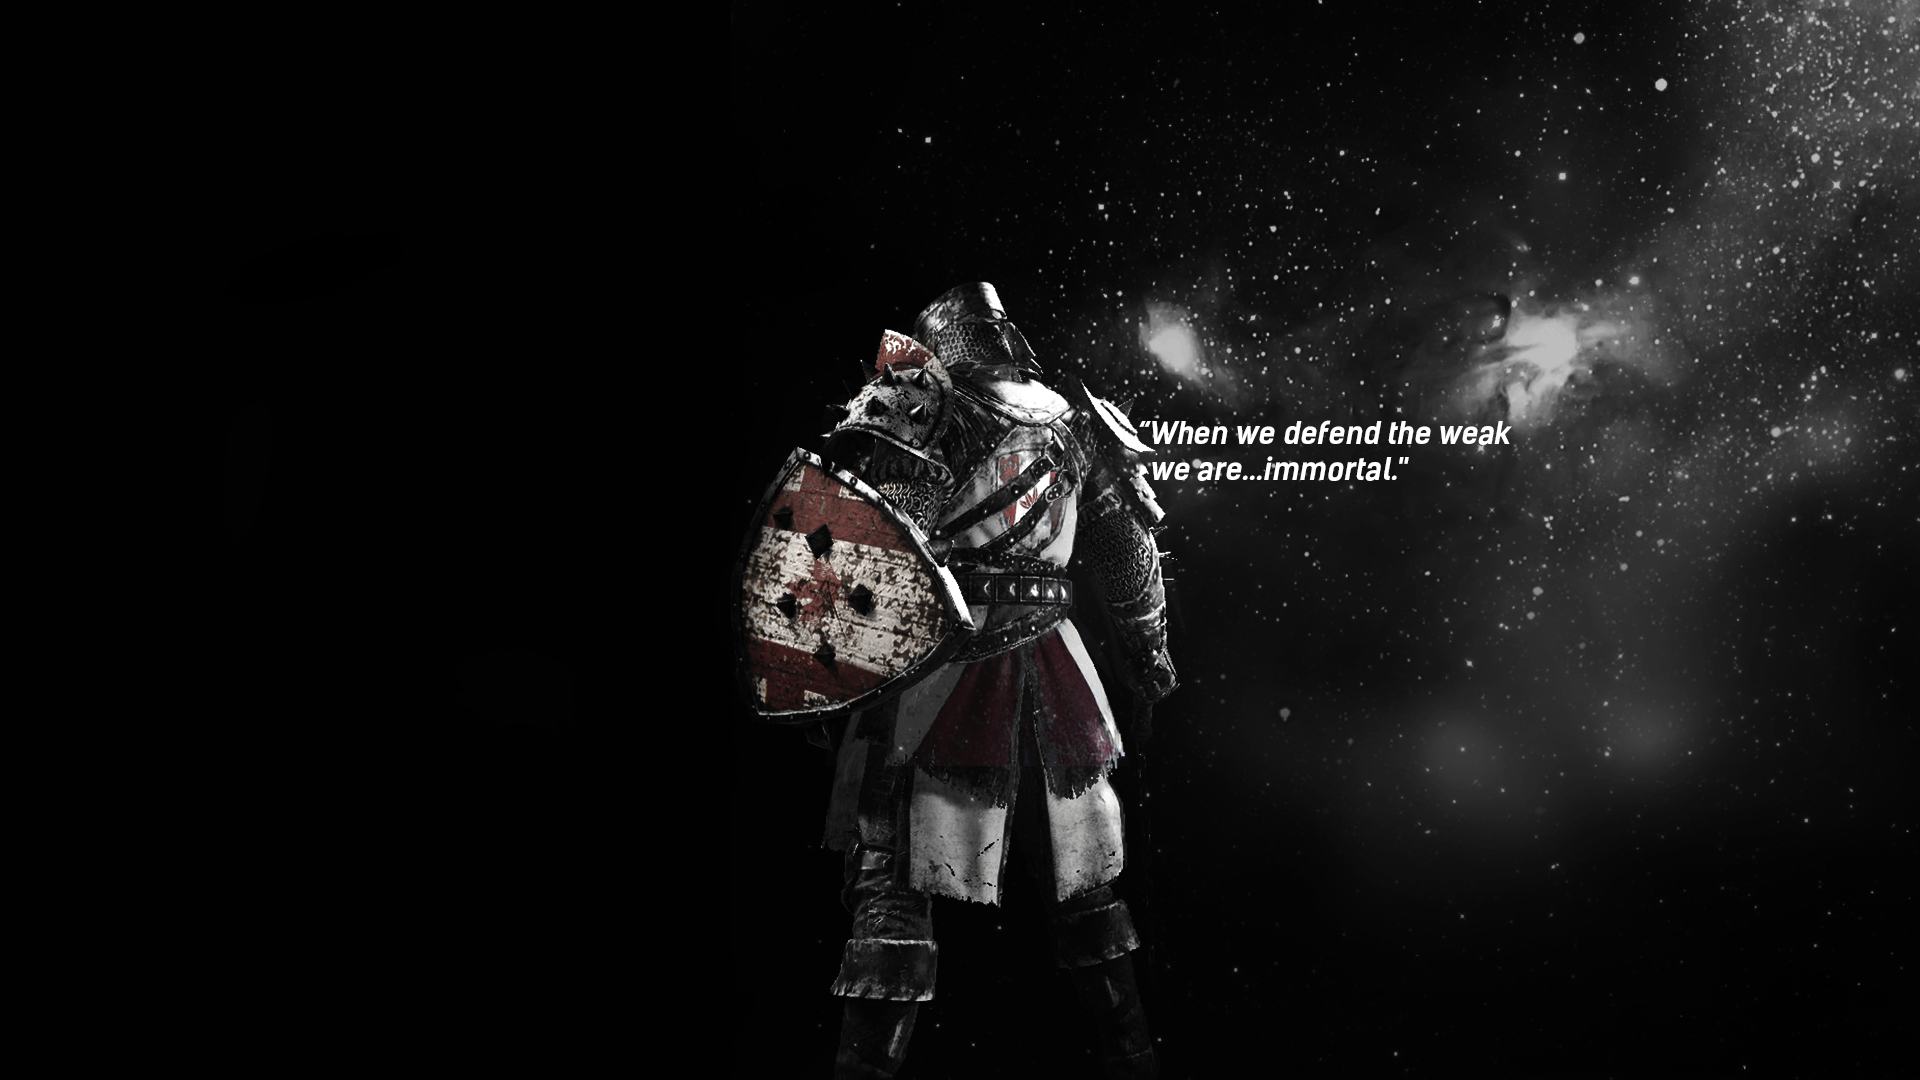 I made a new desktop wallpaper and thought on sharing it. DEUS